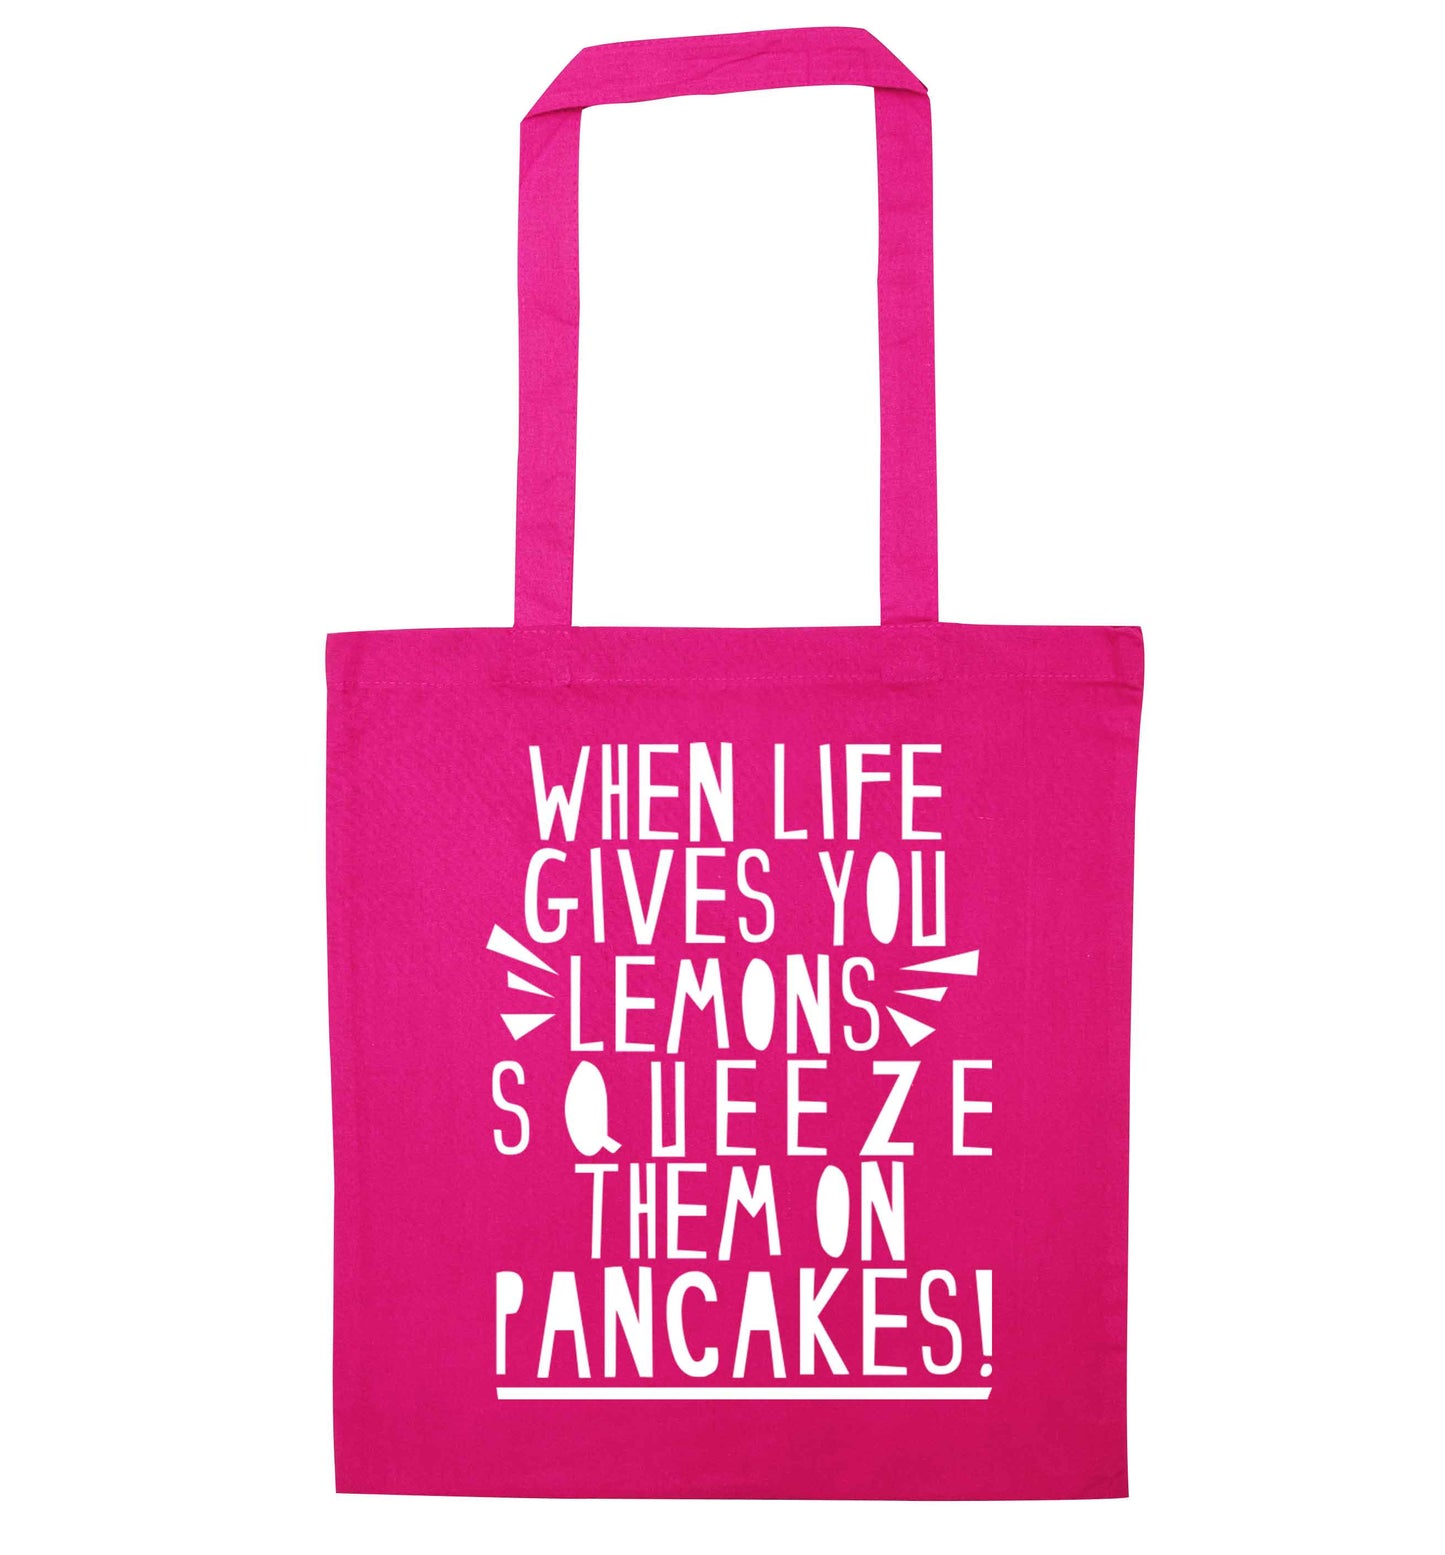 When life gives you lemons squeeze them on pancakes! pink tote bag